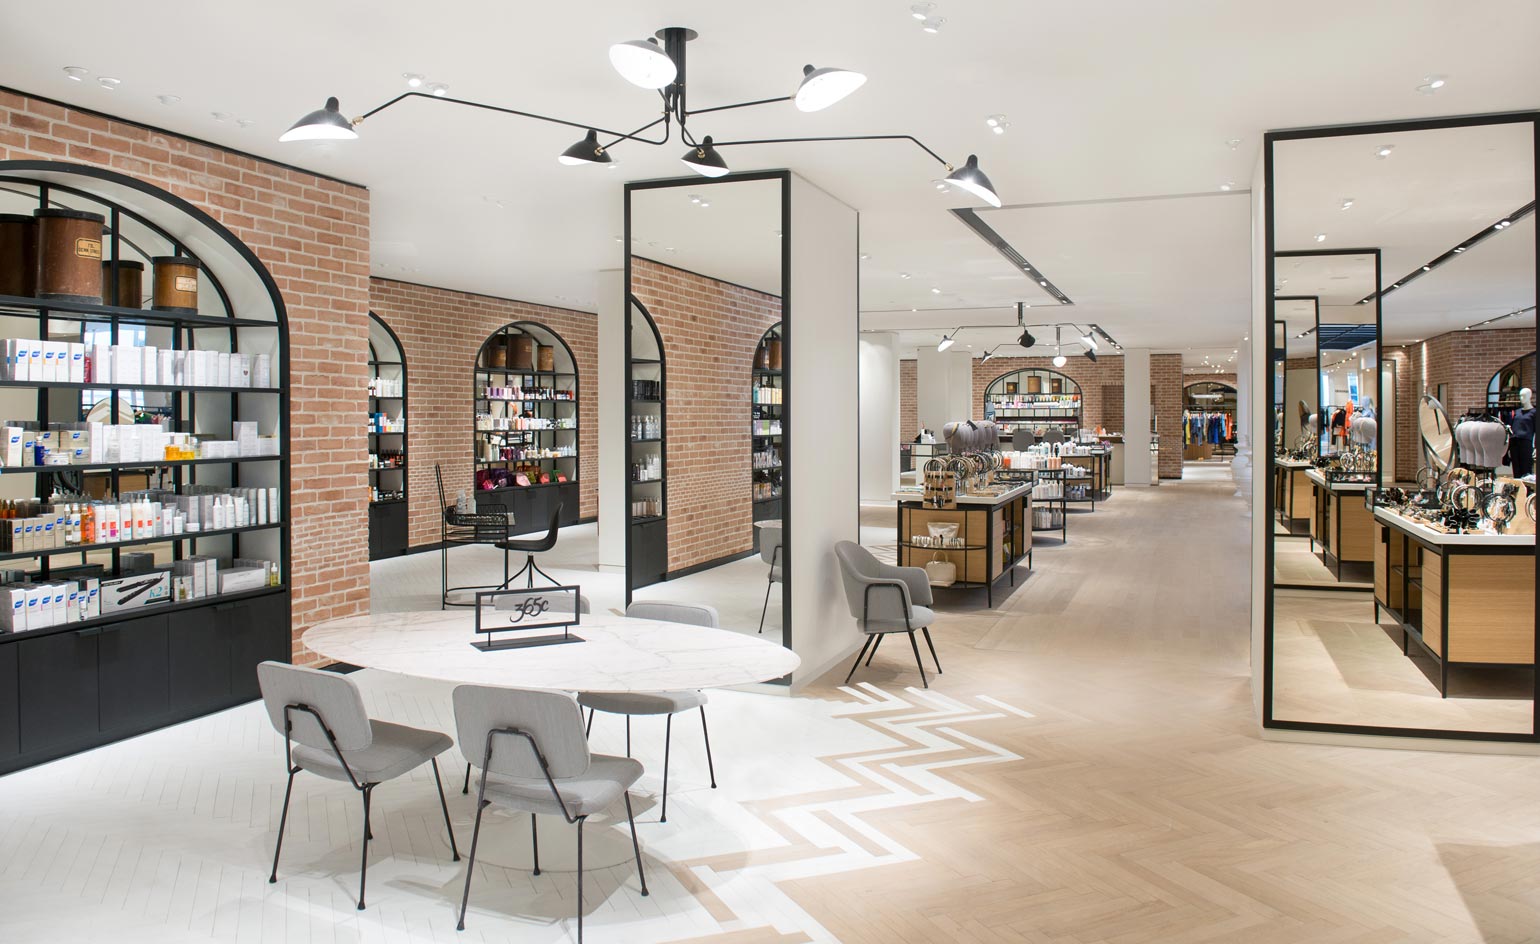 Le Bon Marché Rive Gauche Redesigned its Leather Goods Space - IGDS